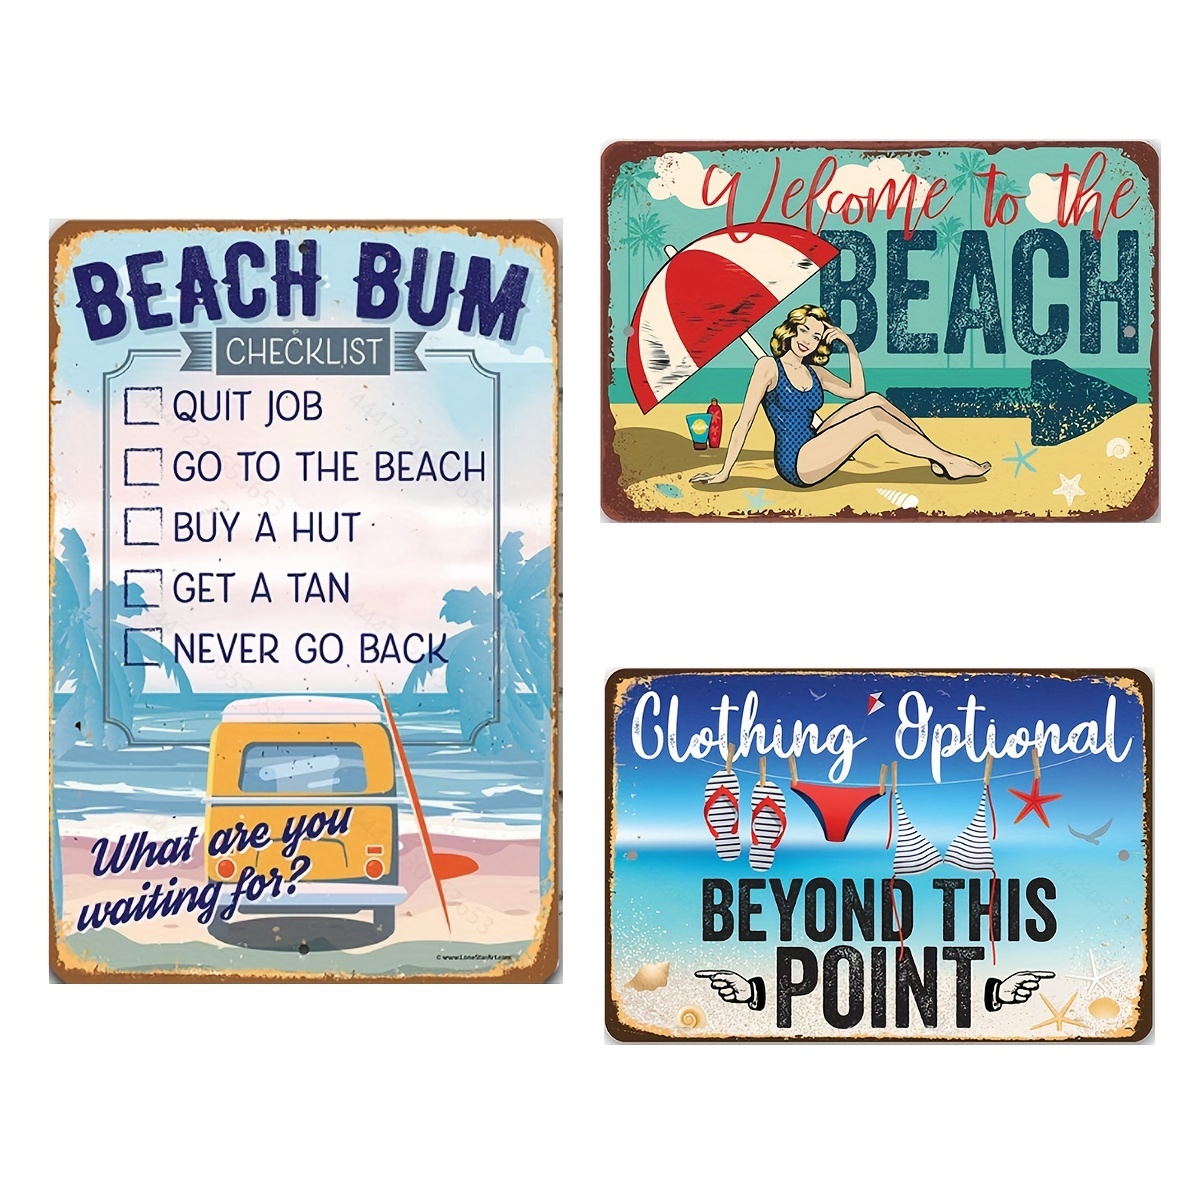 1pc Beach Metal Tin Sign Beach Bum Checklist For Indoor Outdoor Cafe Bar Bedroom Pool Decorations 12 8 Inch